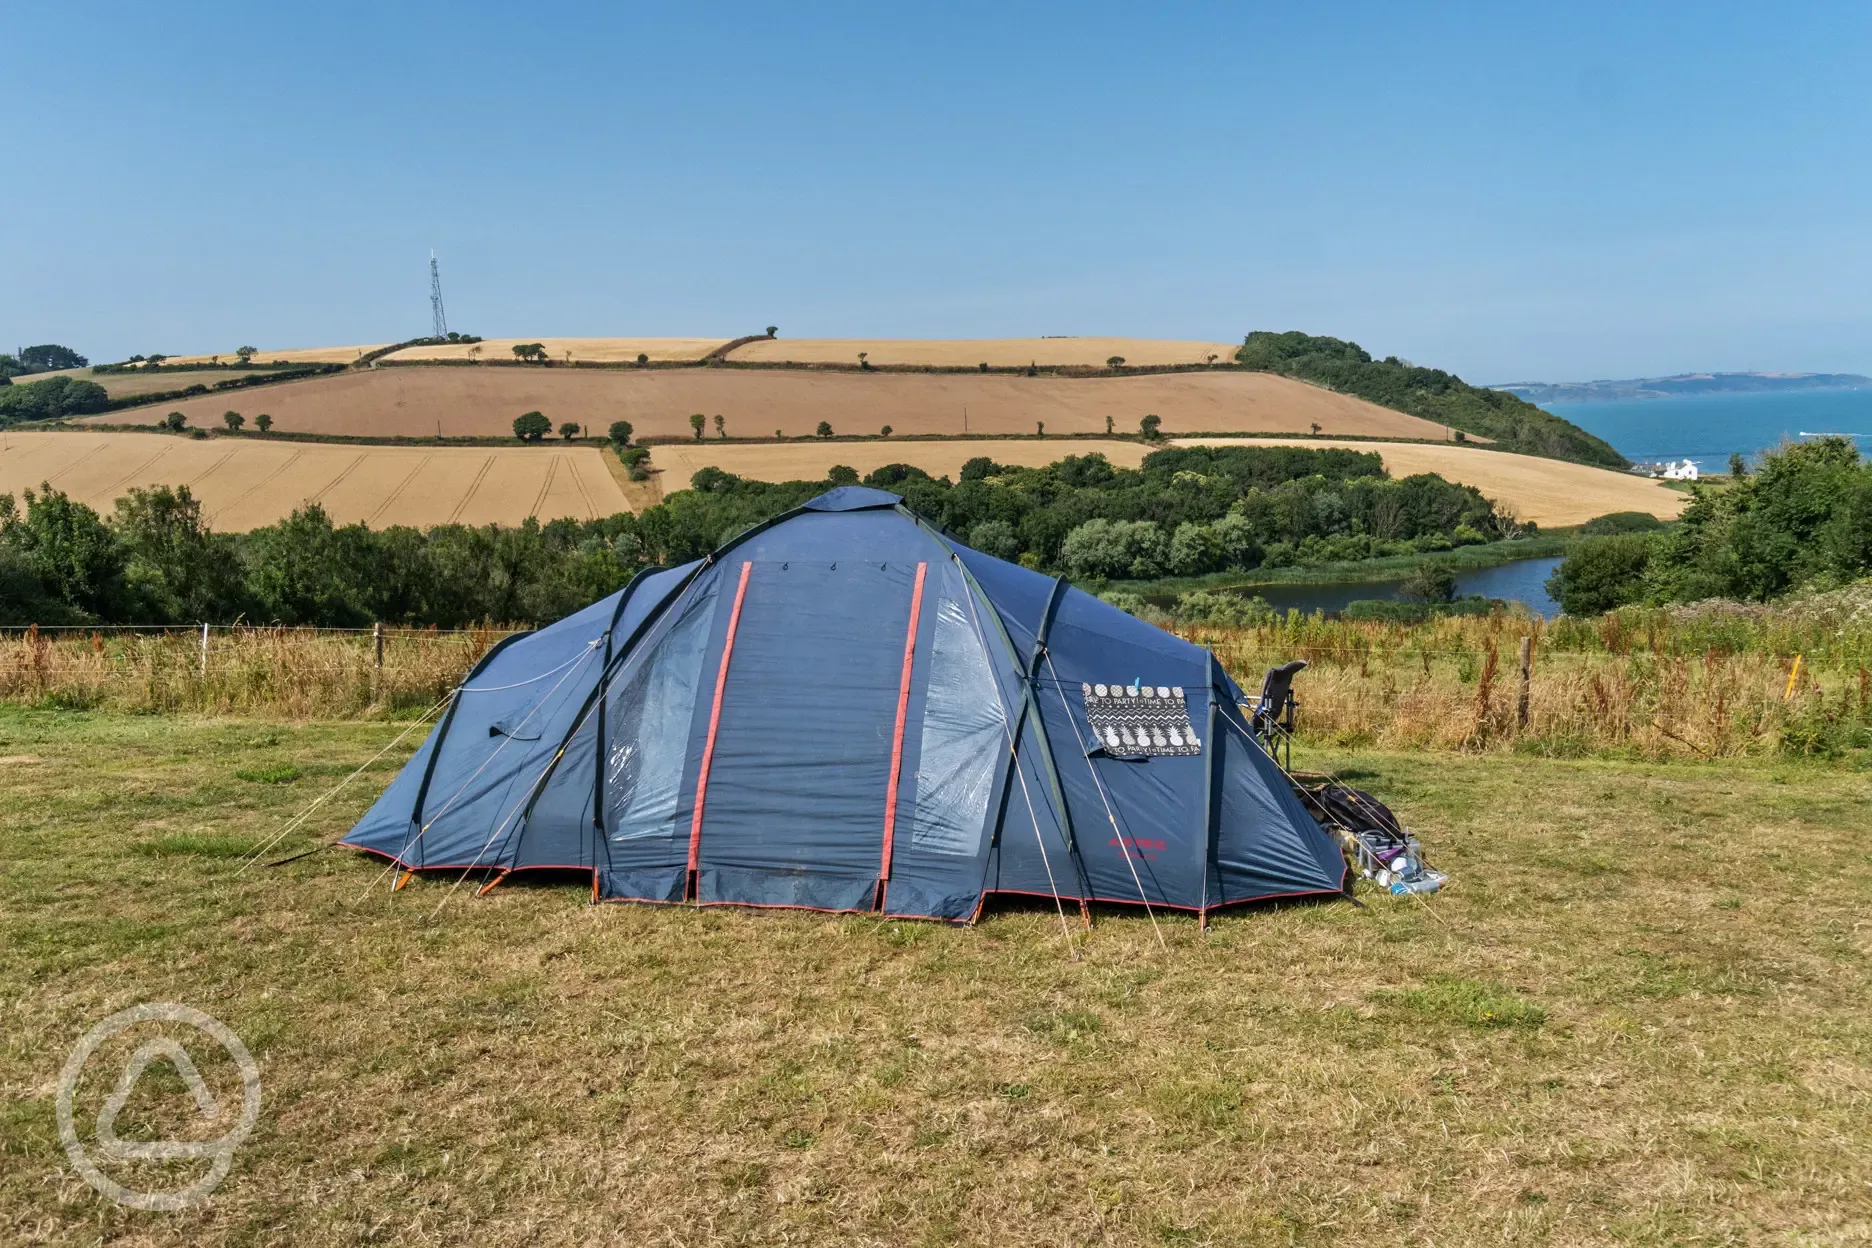 Tent pitched